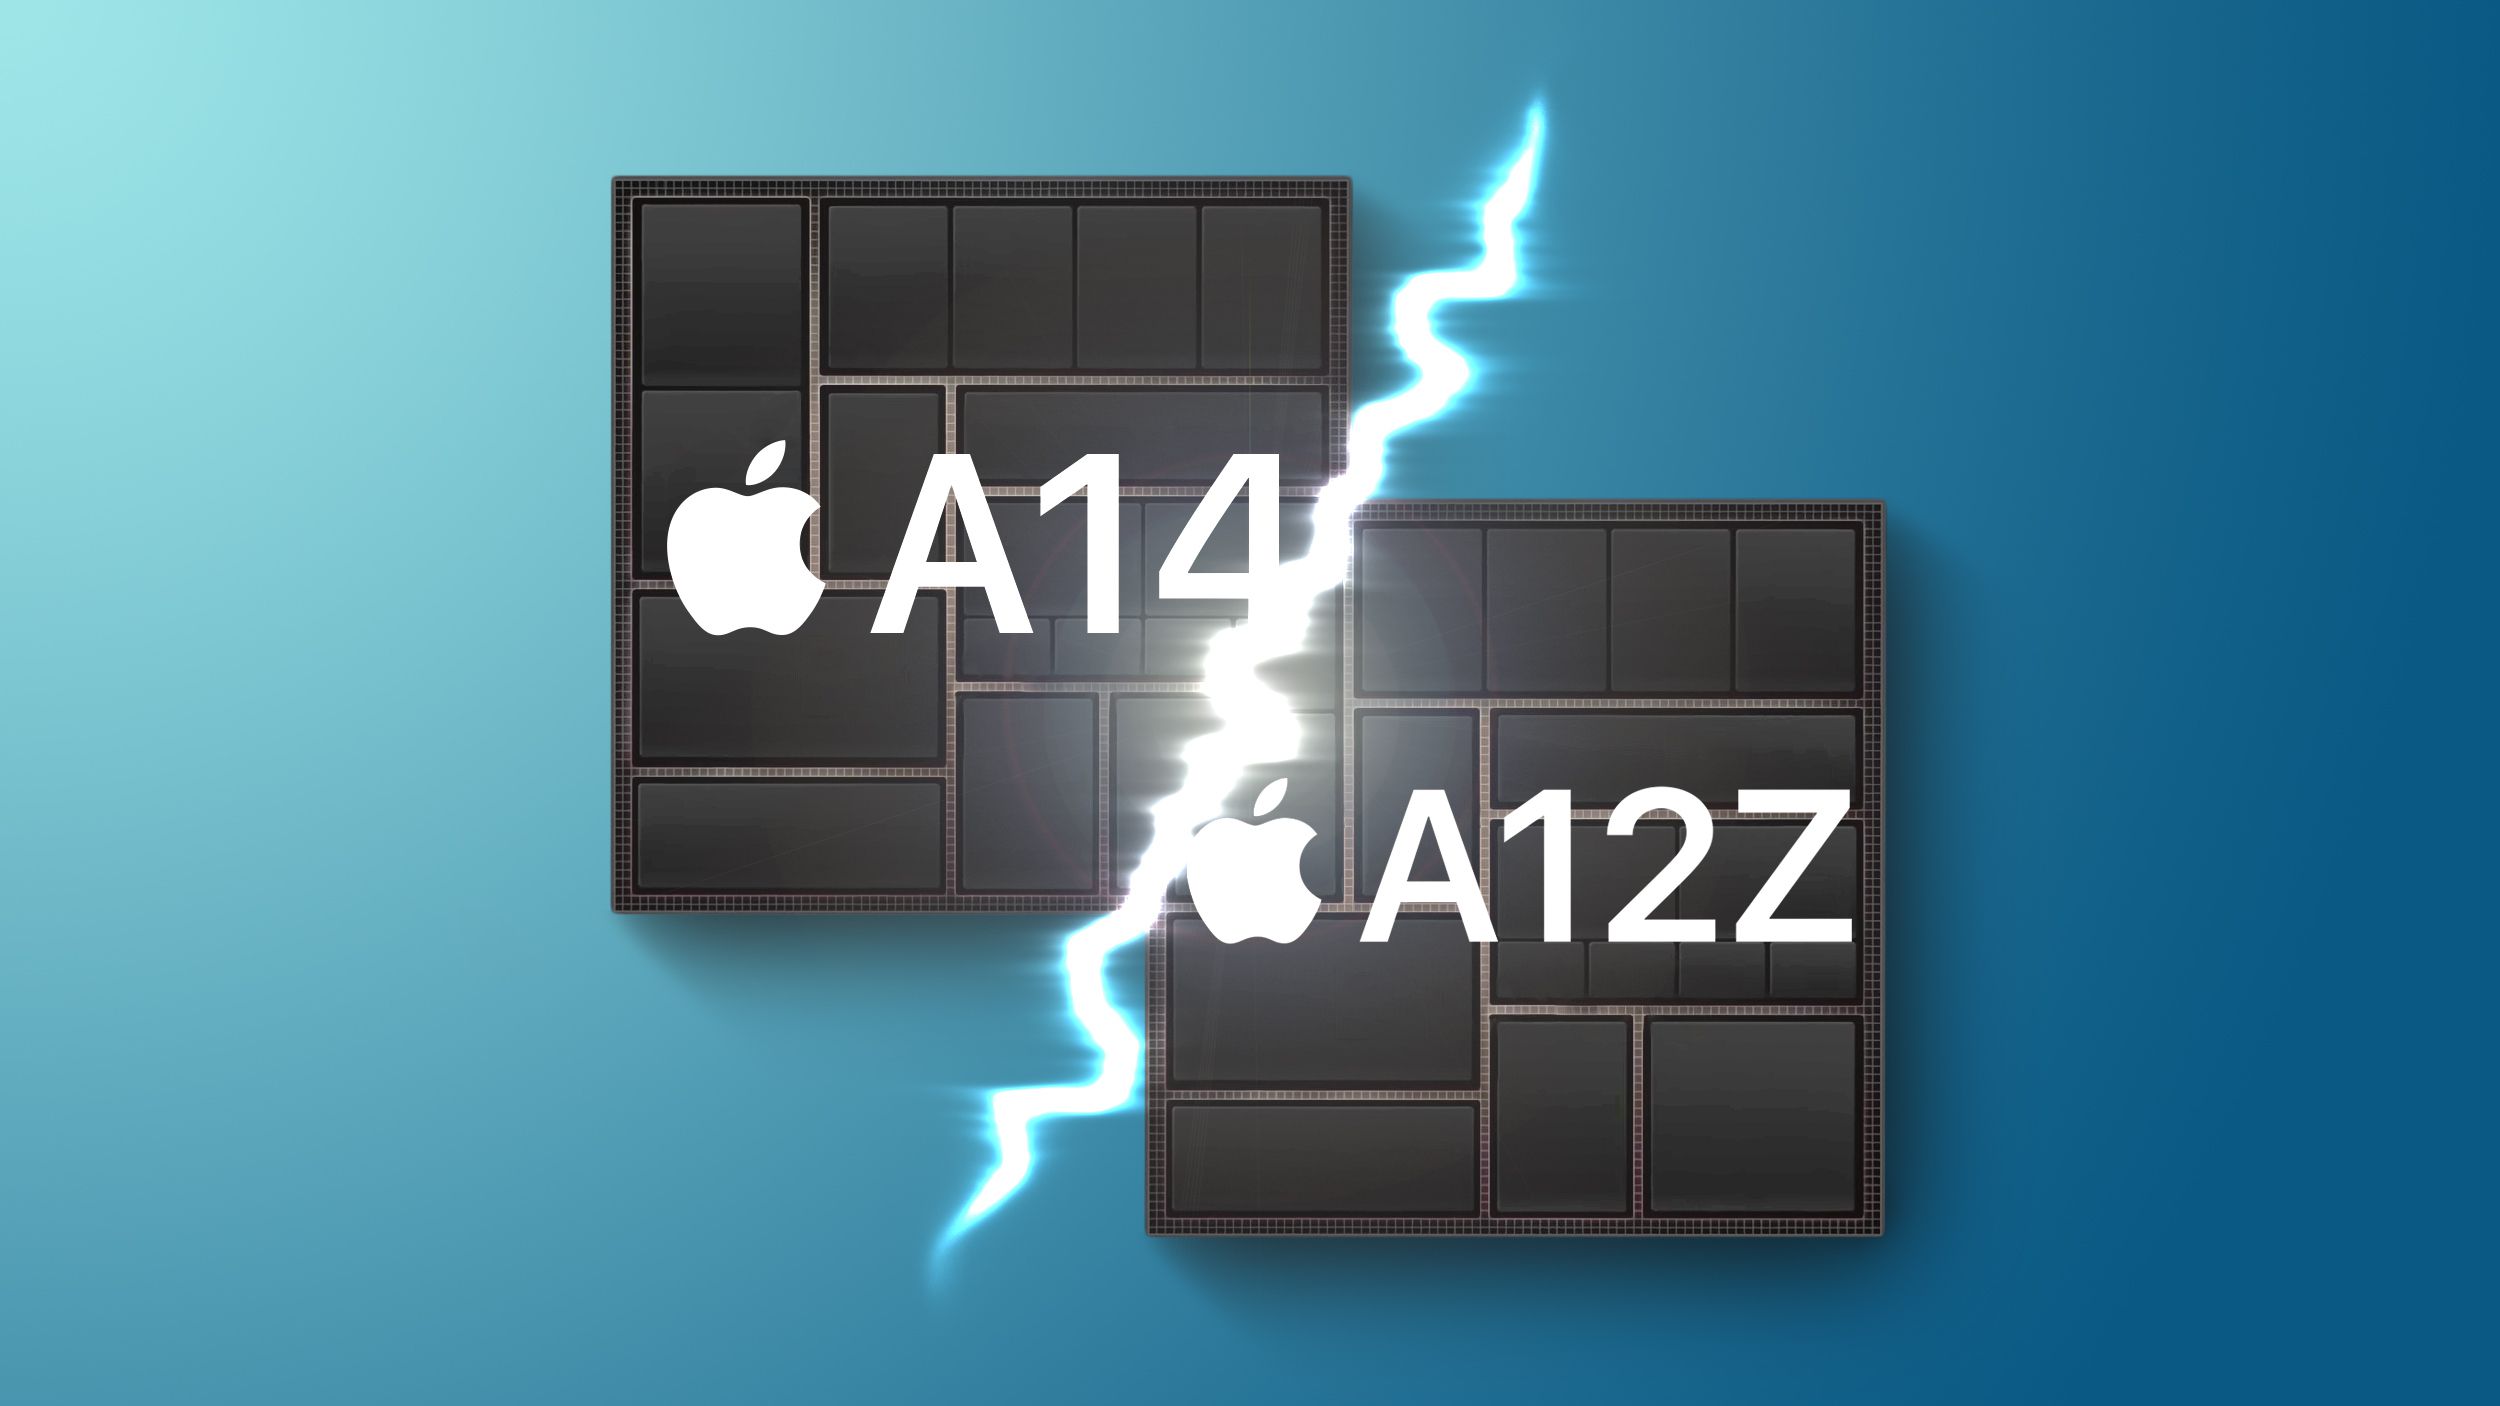 A12Z vs. A14: Which Apple Chip is Better?